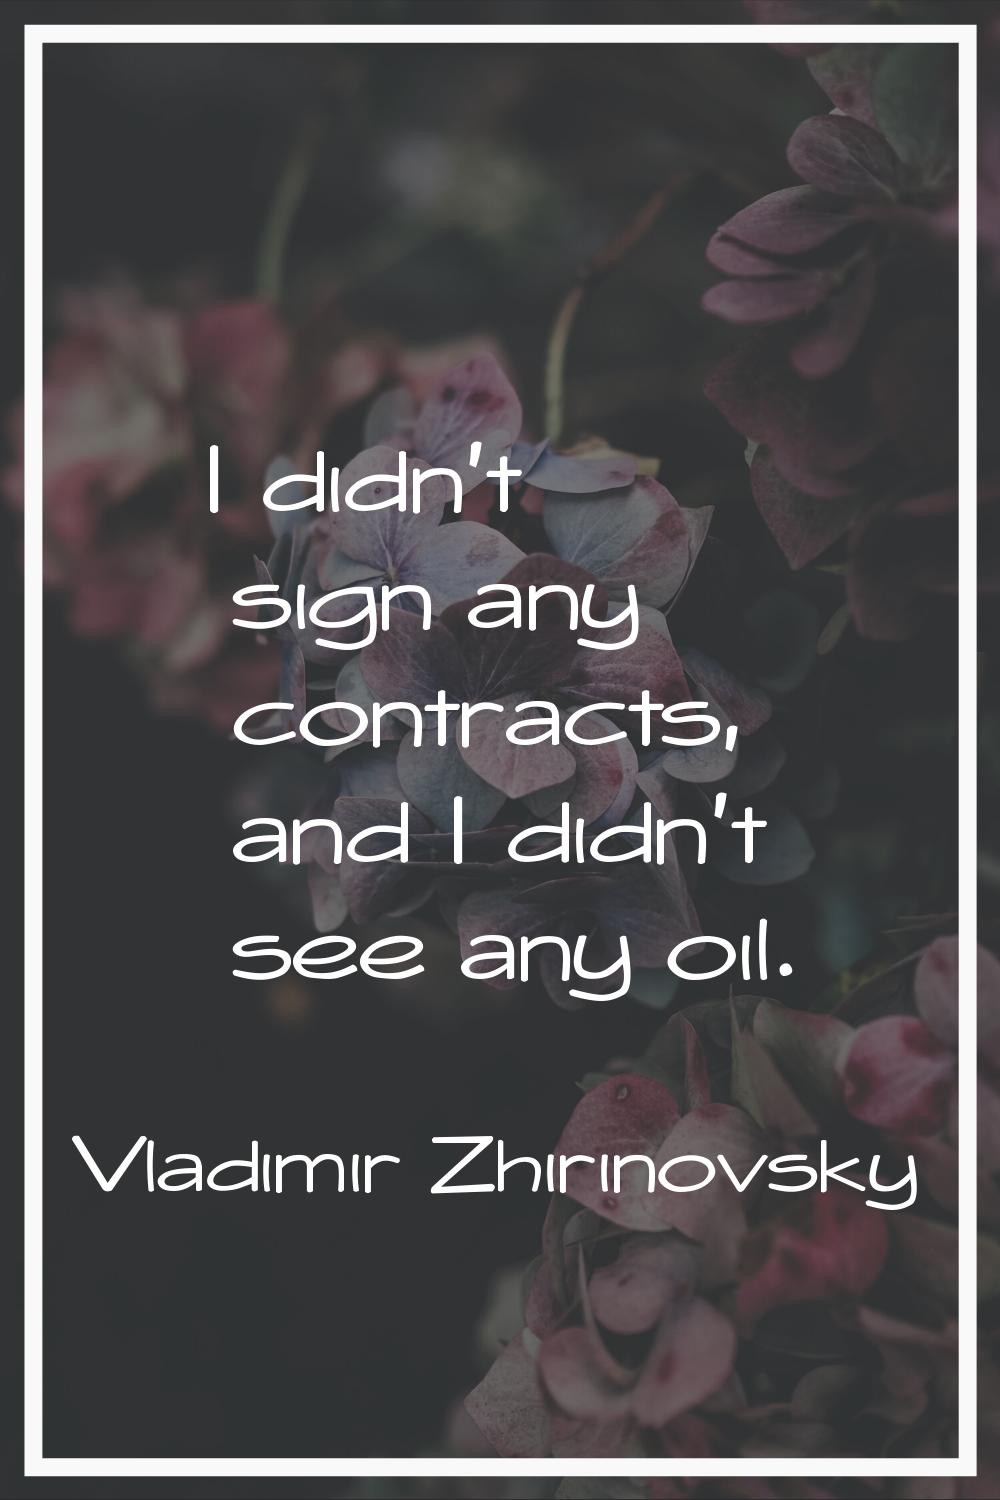 I didn't sign any contracts, and I didn't see any oil.